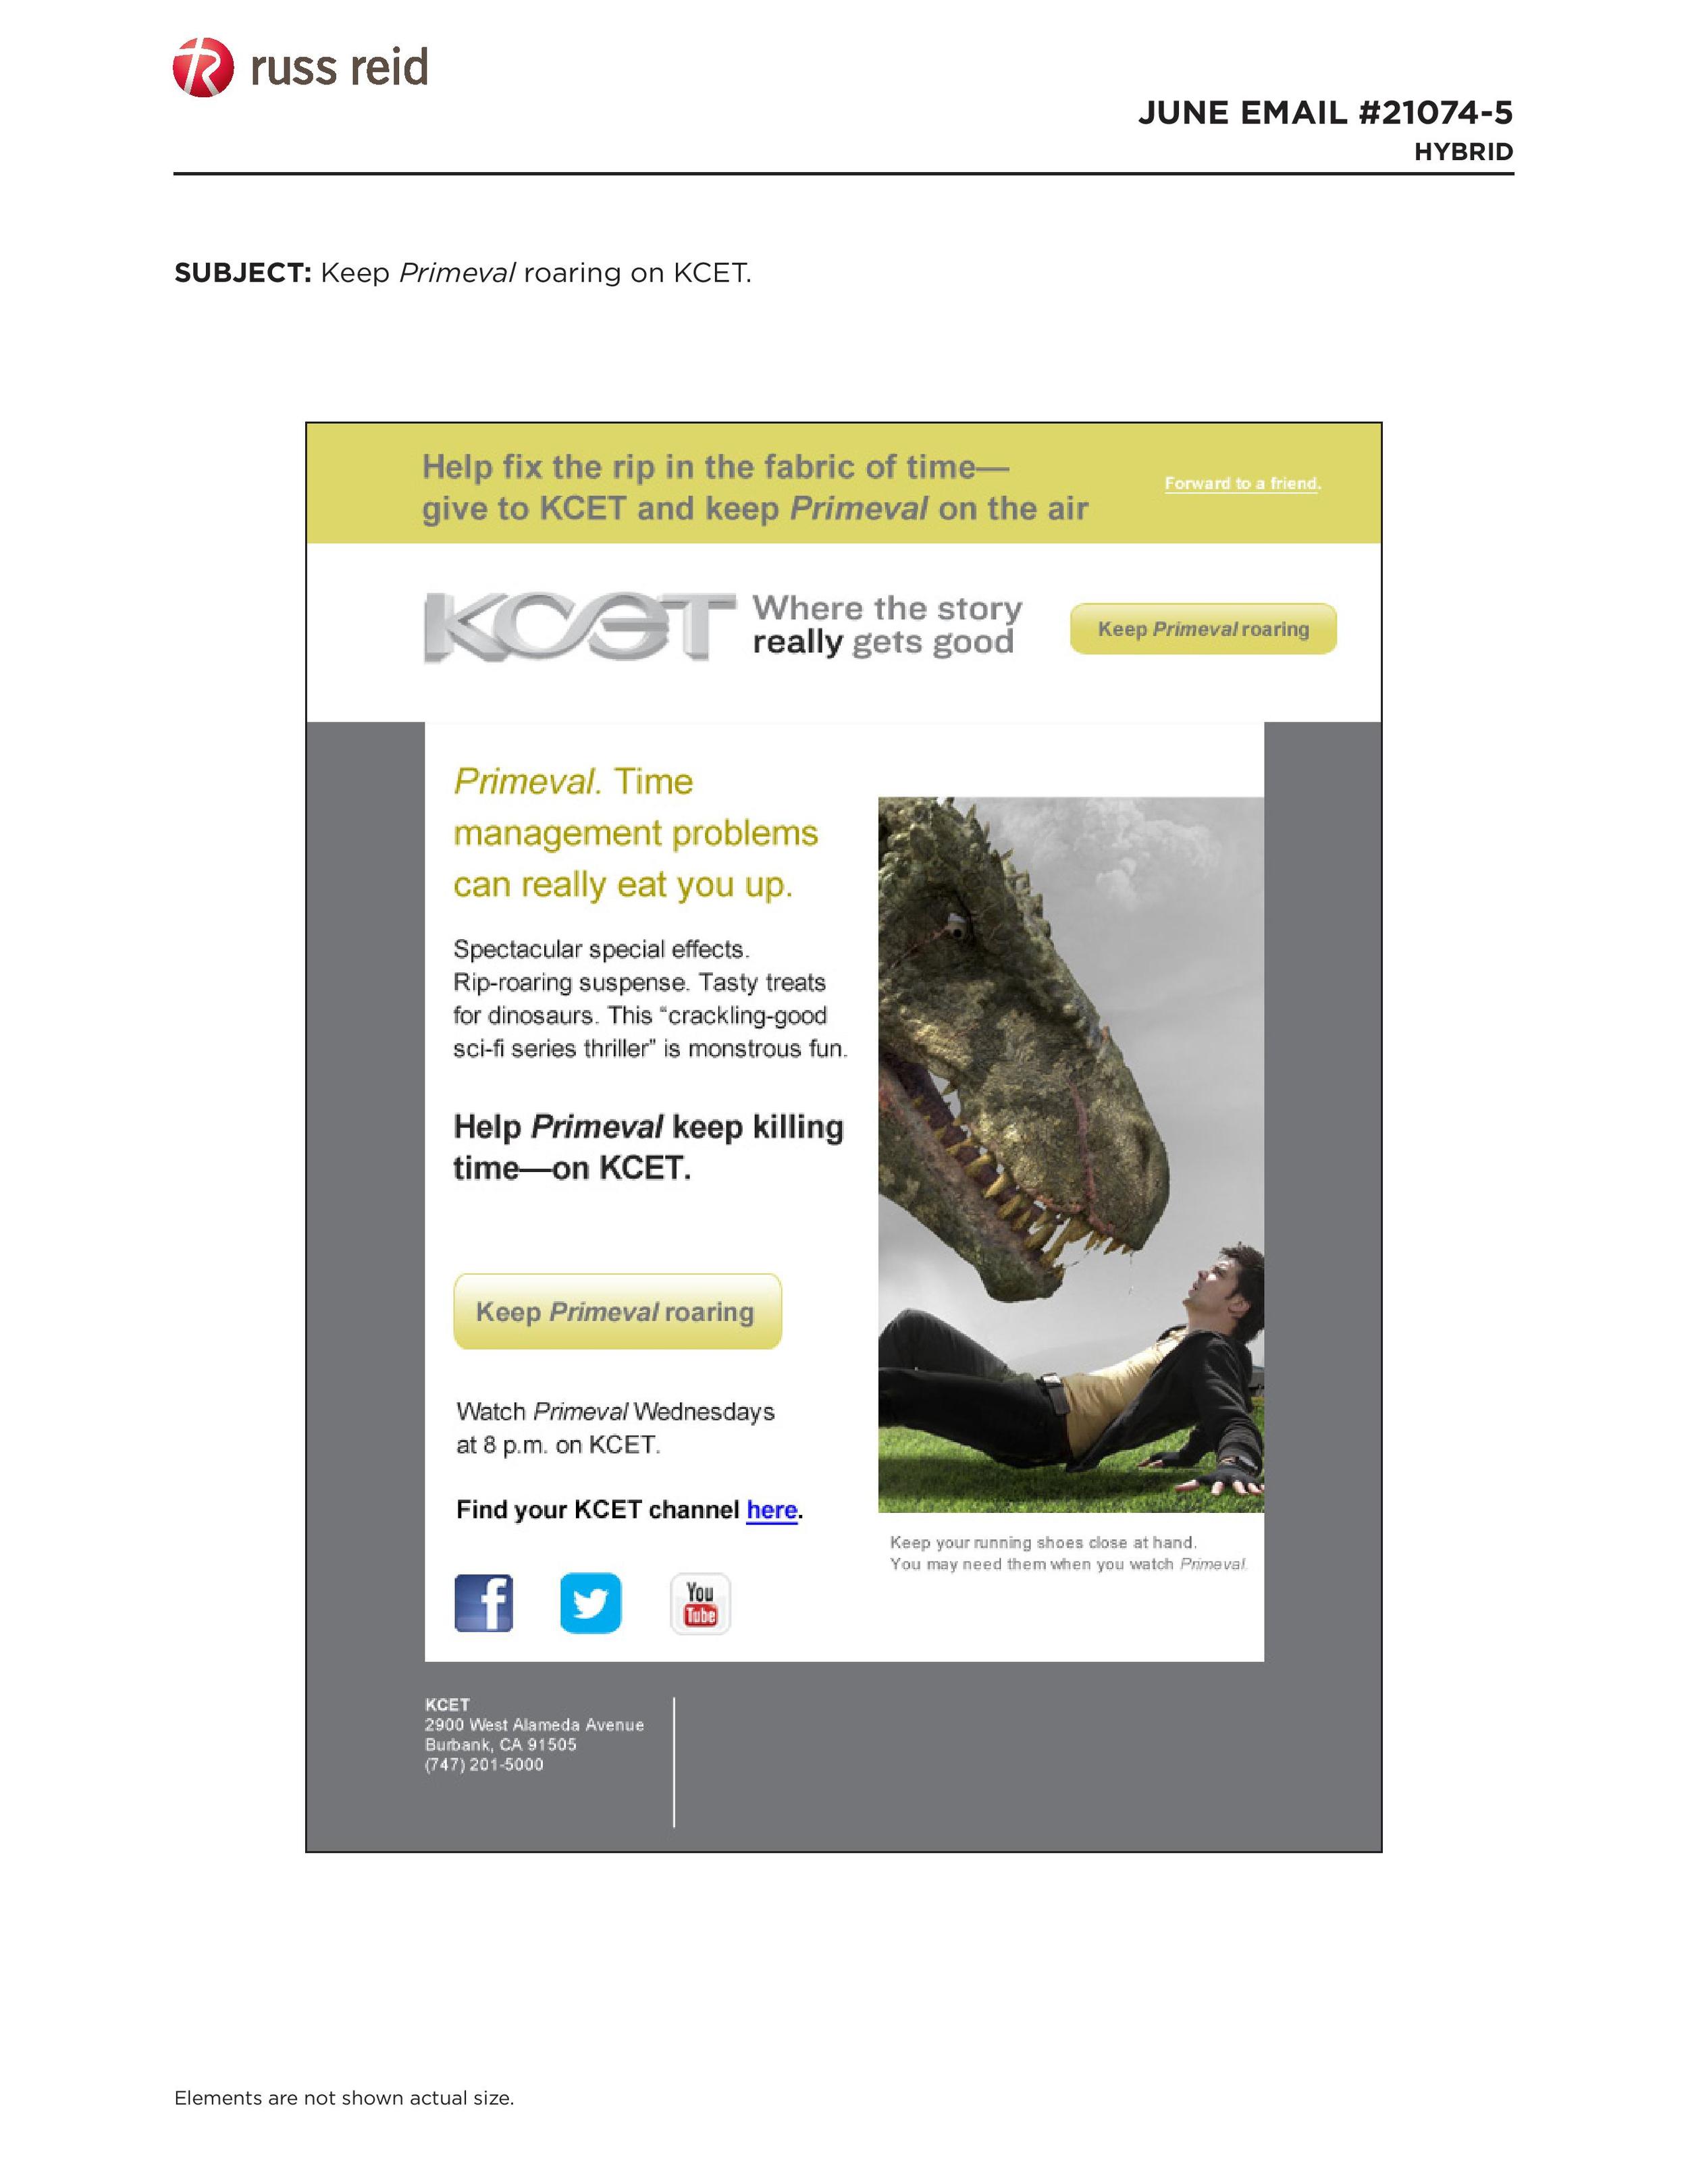 KCET Fundraising Email